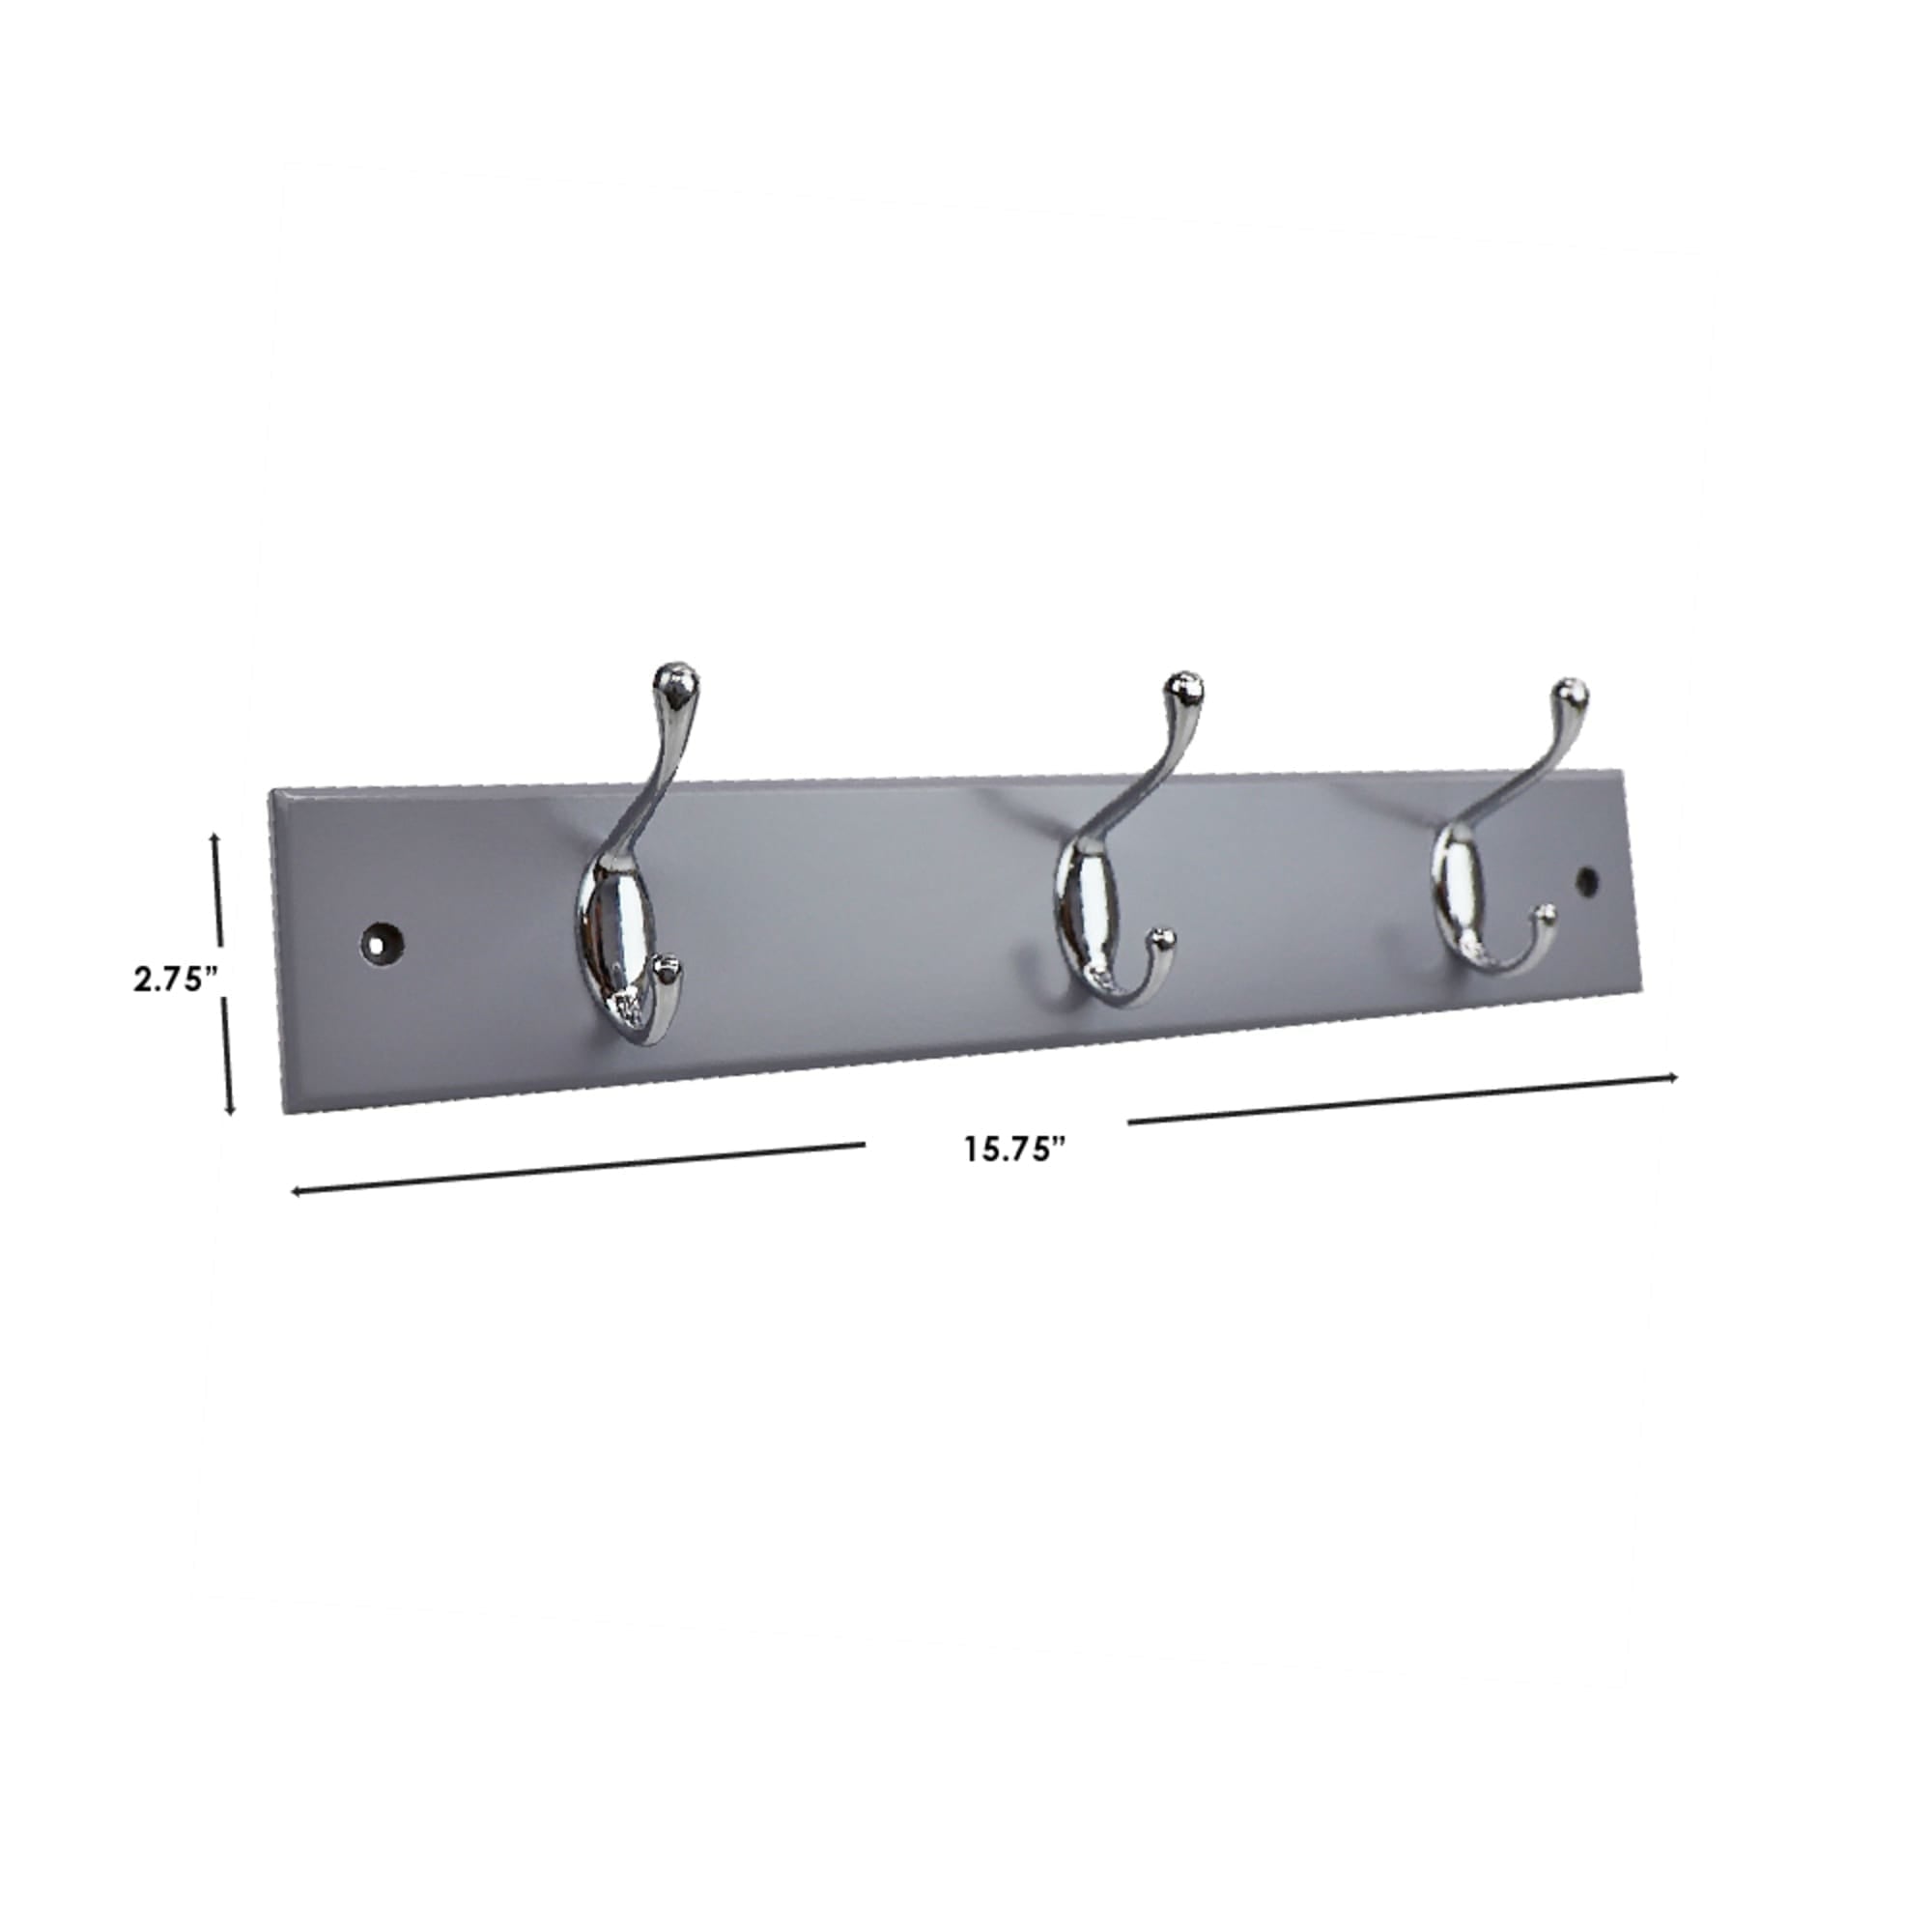 Home Basics 3 Double Hook Wall Mounted Hanging Rack, Grey $8.00 EACH, CASE PACK OF 12